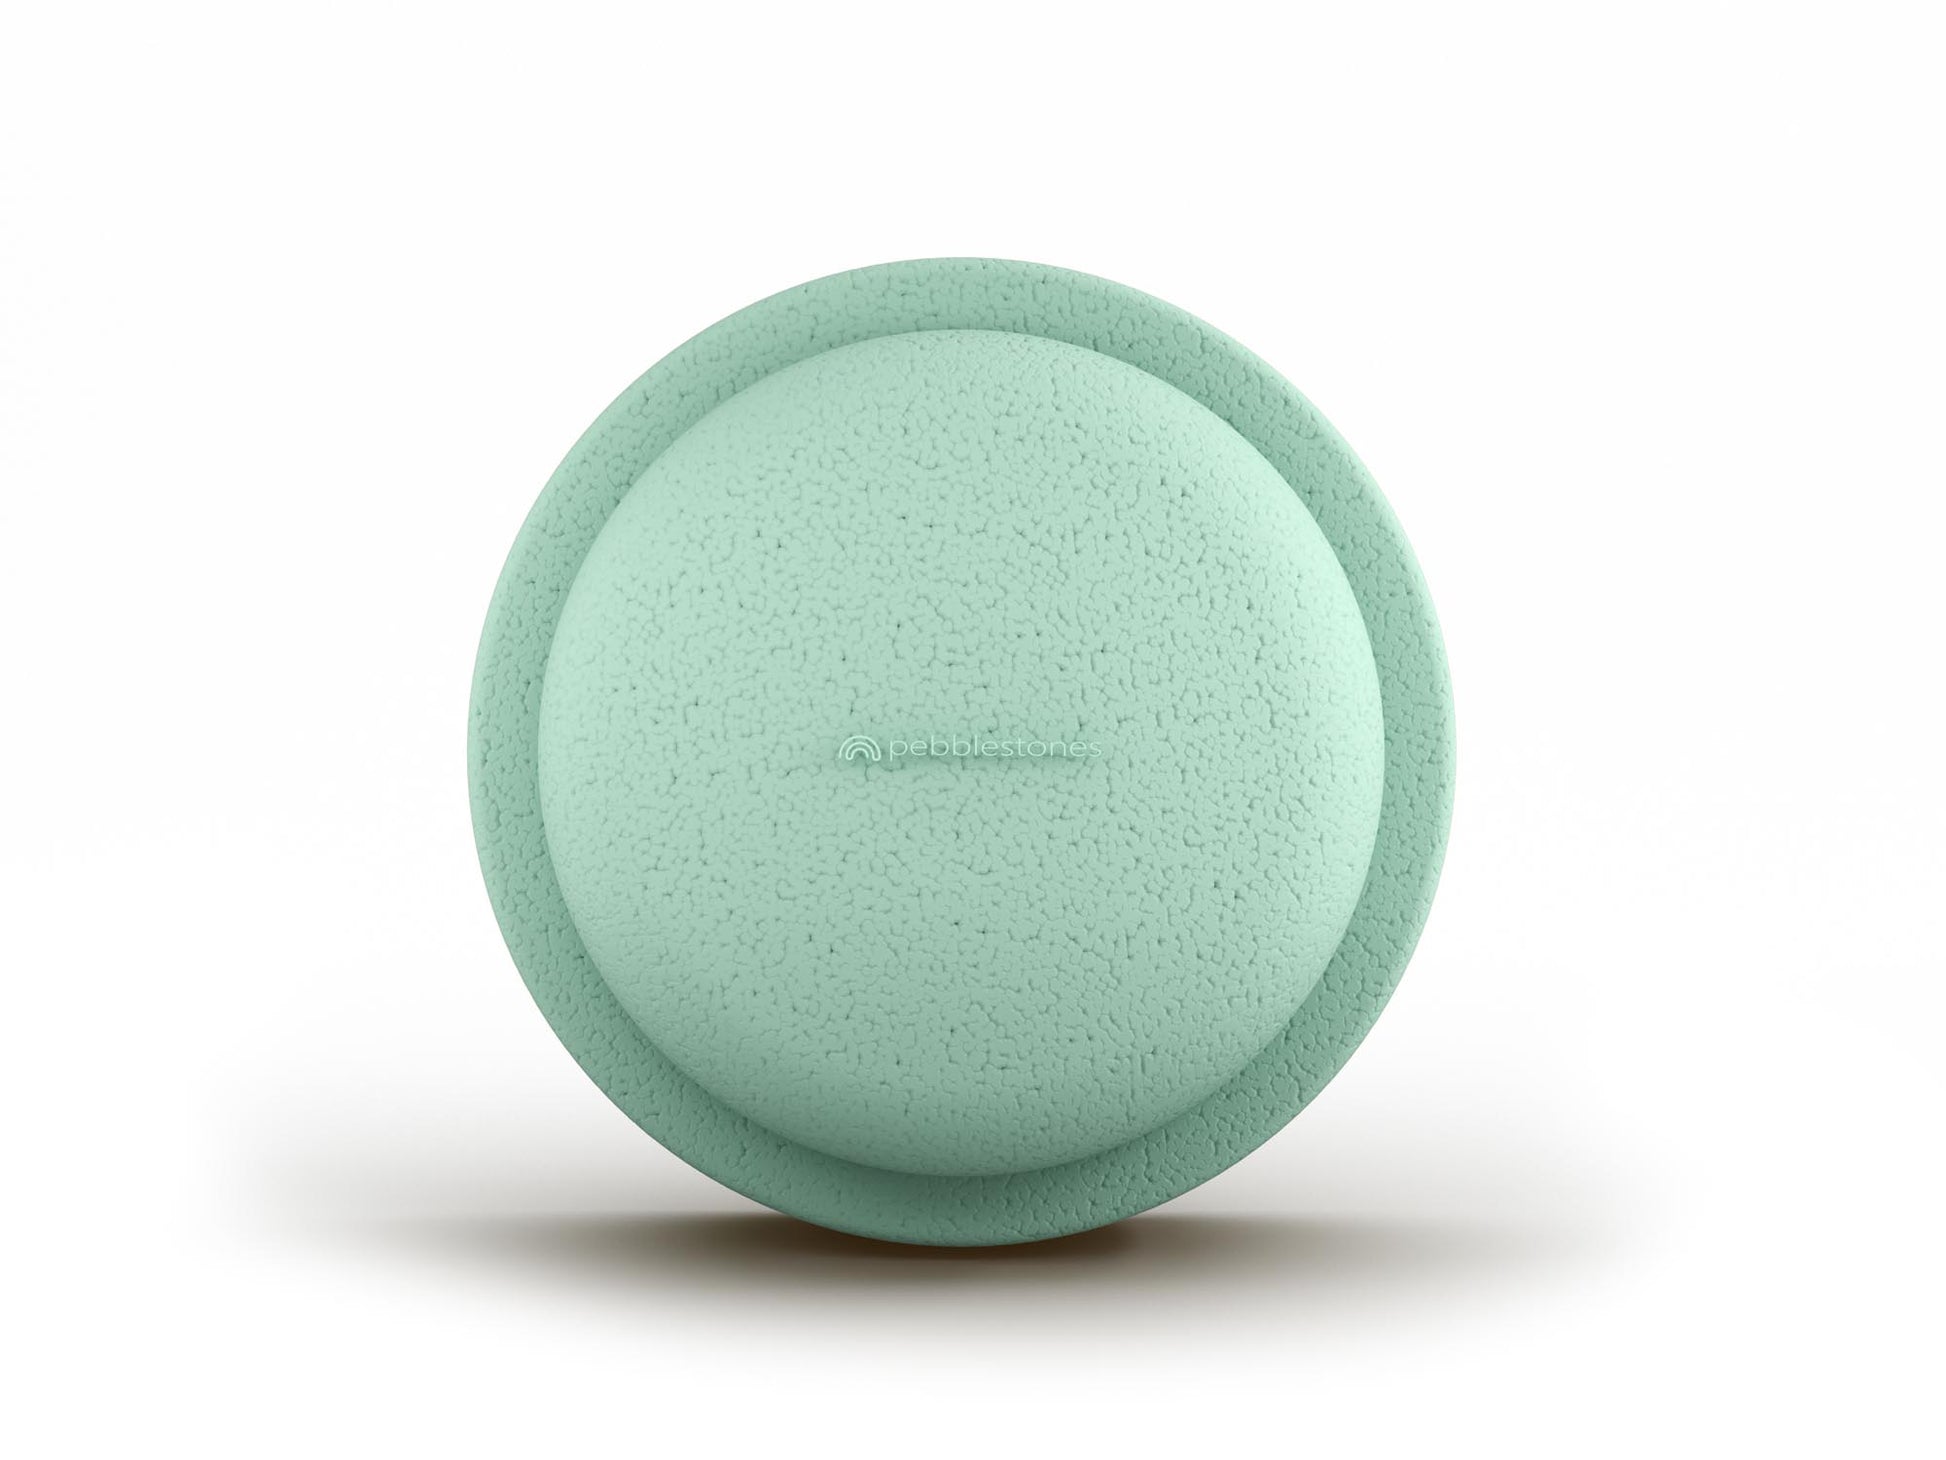 Seafoam color versatile fun stacking stones made out of lightweight foam for kids for movement, open ended play, active learning, creativity, fun, workout, yoga.